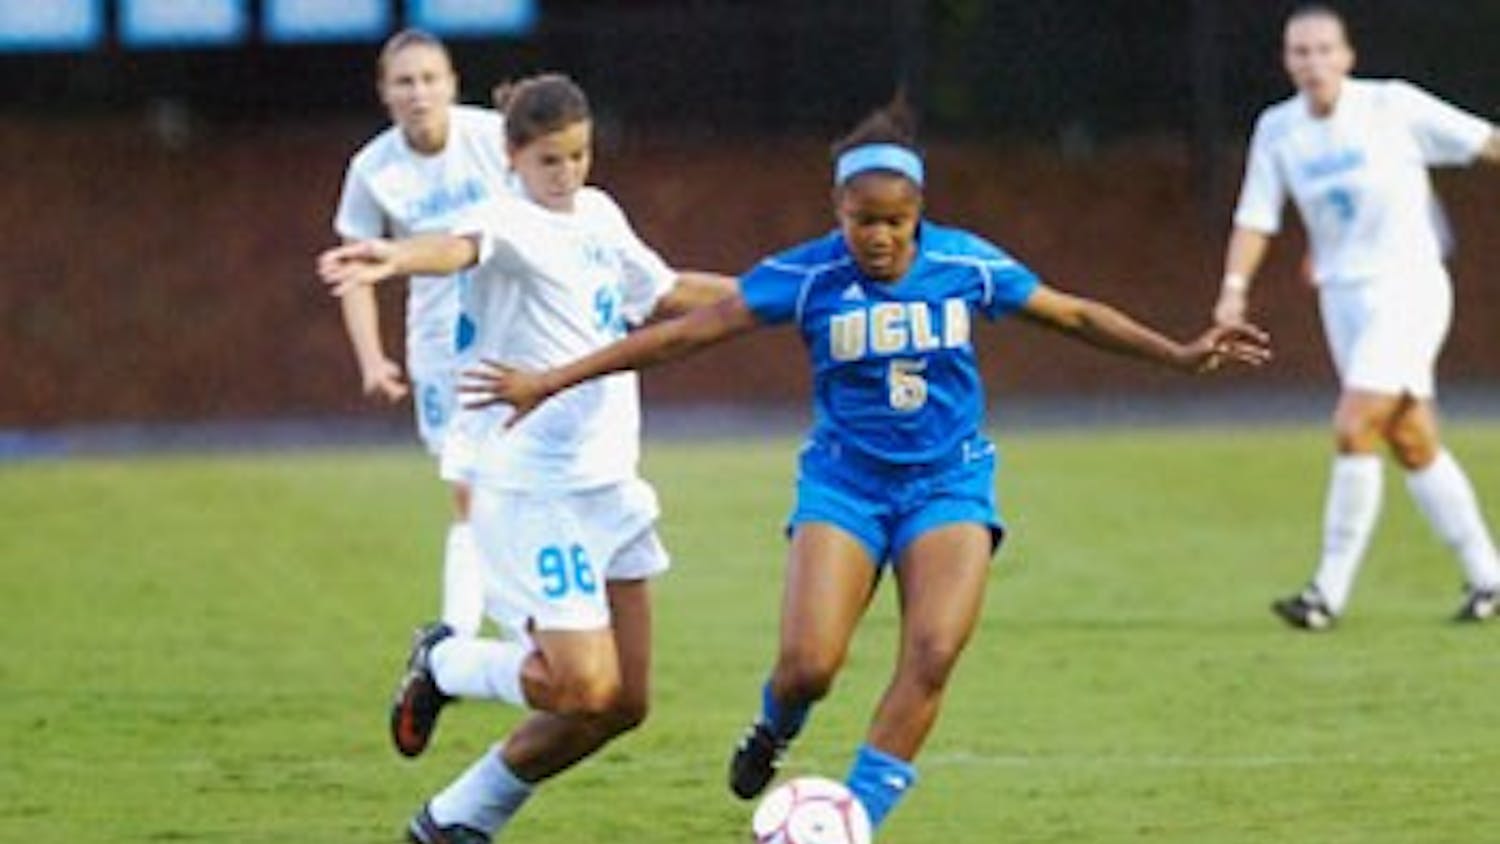 Tobin Heath is a senior leader on UNC’s midfield. She and others are gunning for a national championship. DTH/Andrew Dye